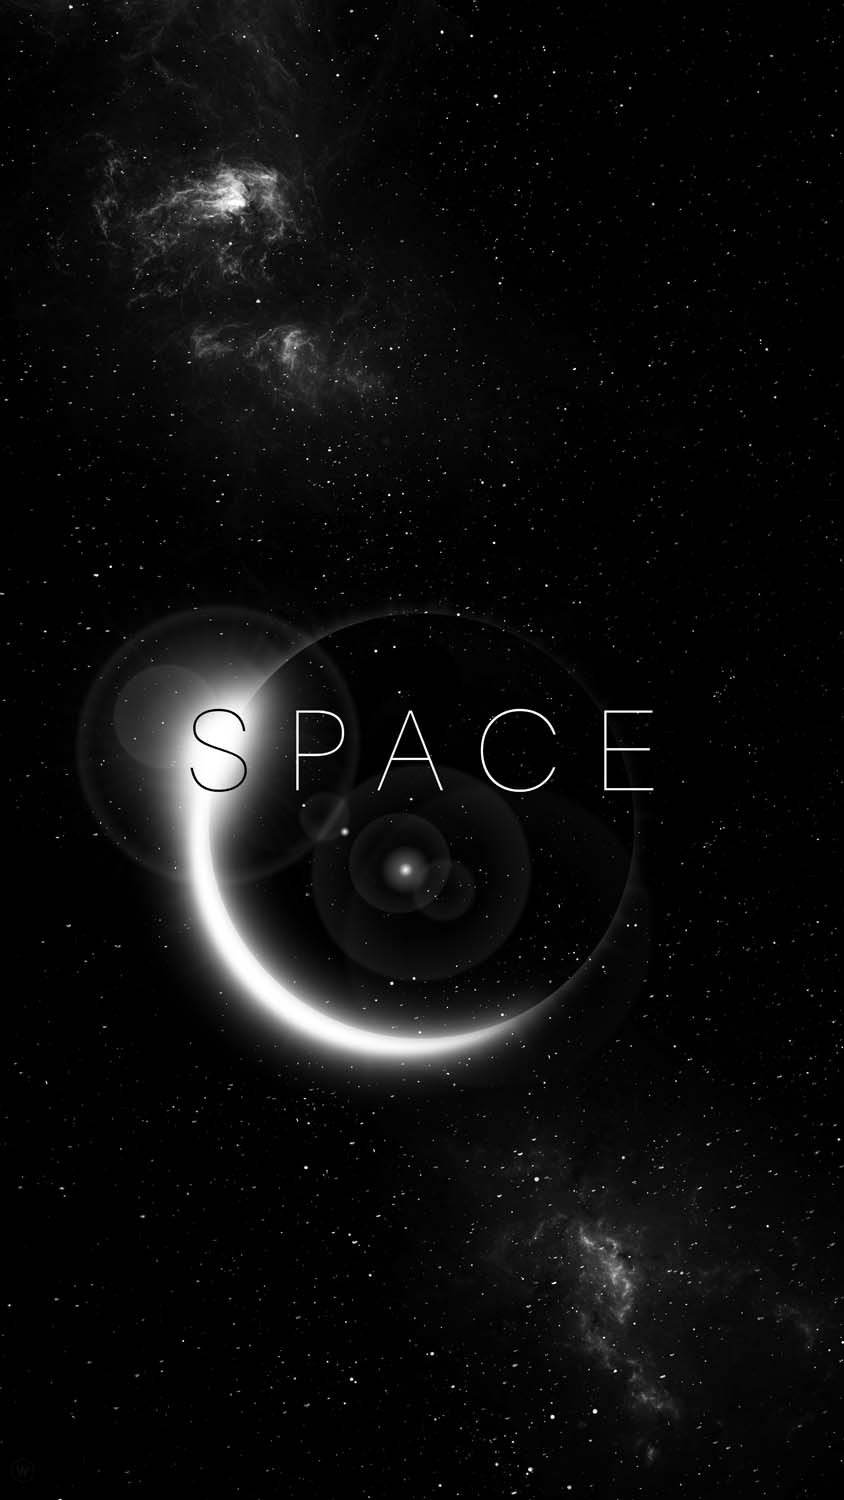 Space IPhone Wallpaper HD  IPhone Wallpapers